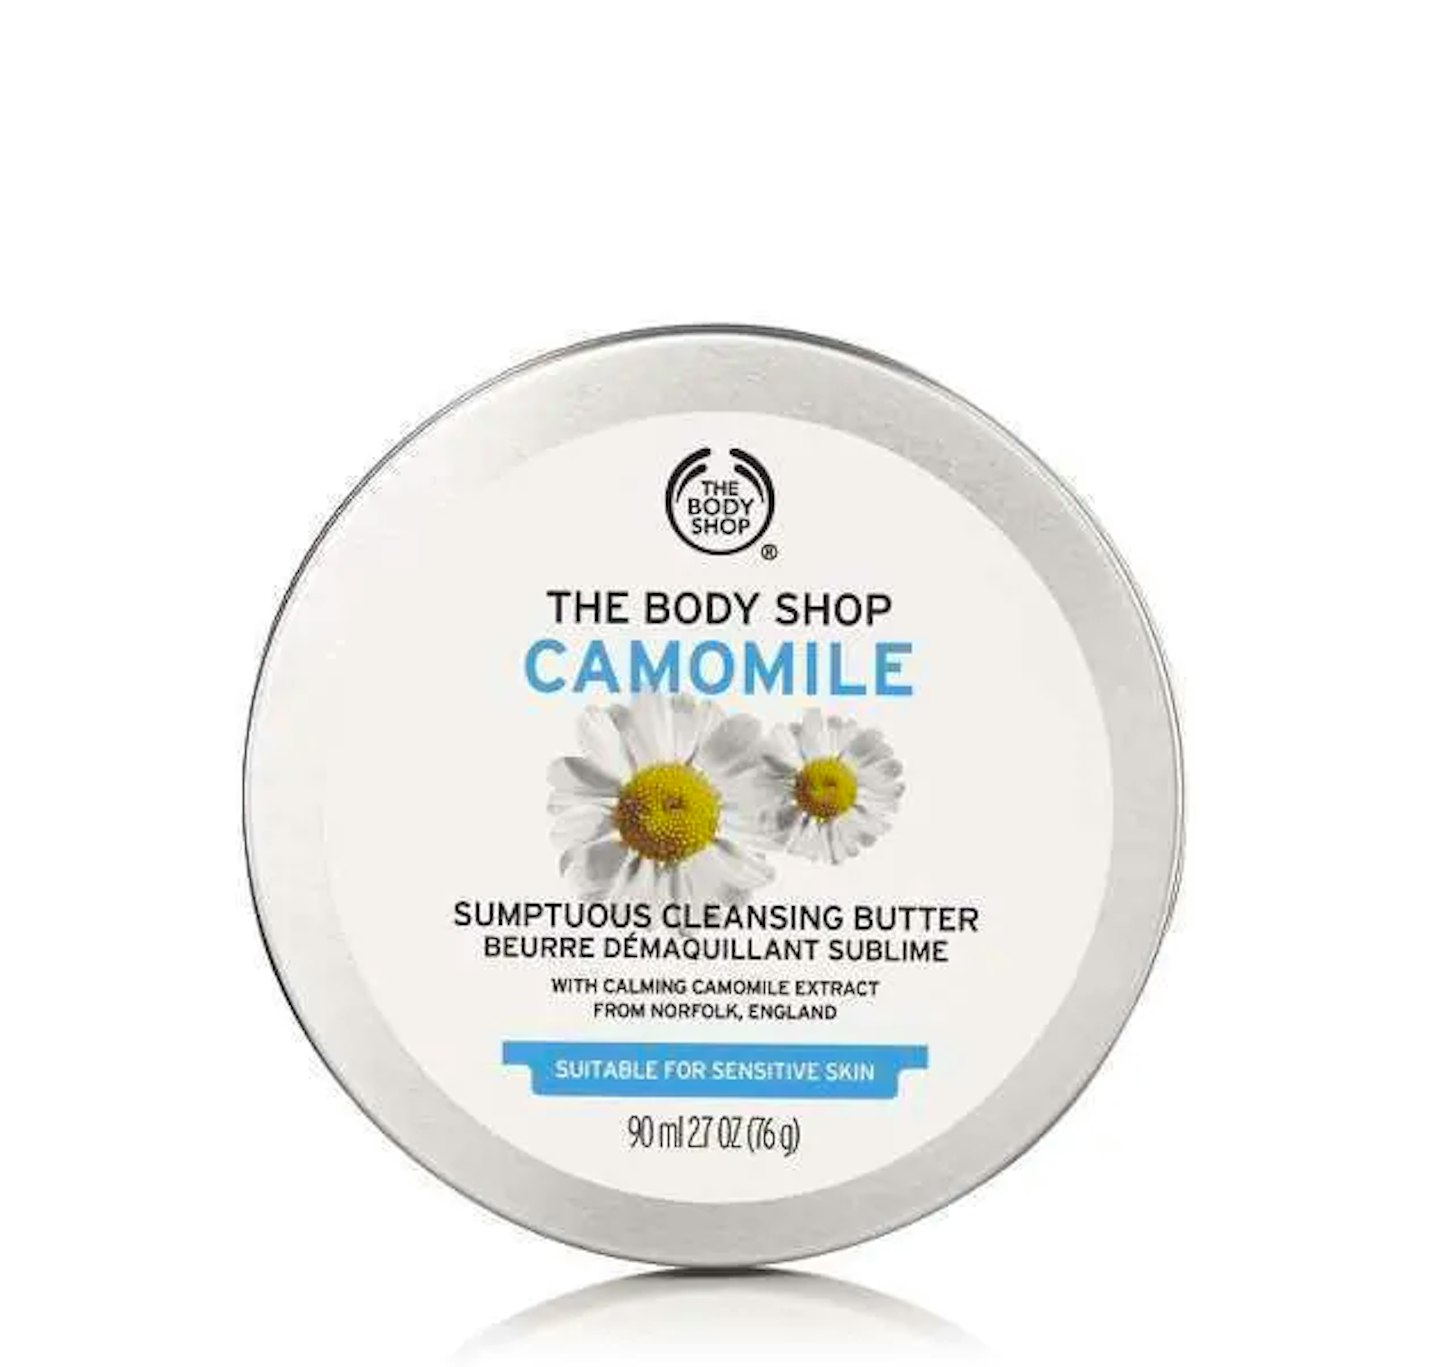 The Body Shop, Camomile Sumptuous Cleansing Butter, £10